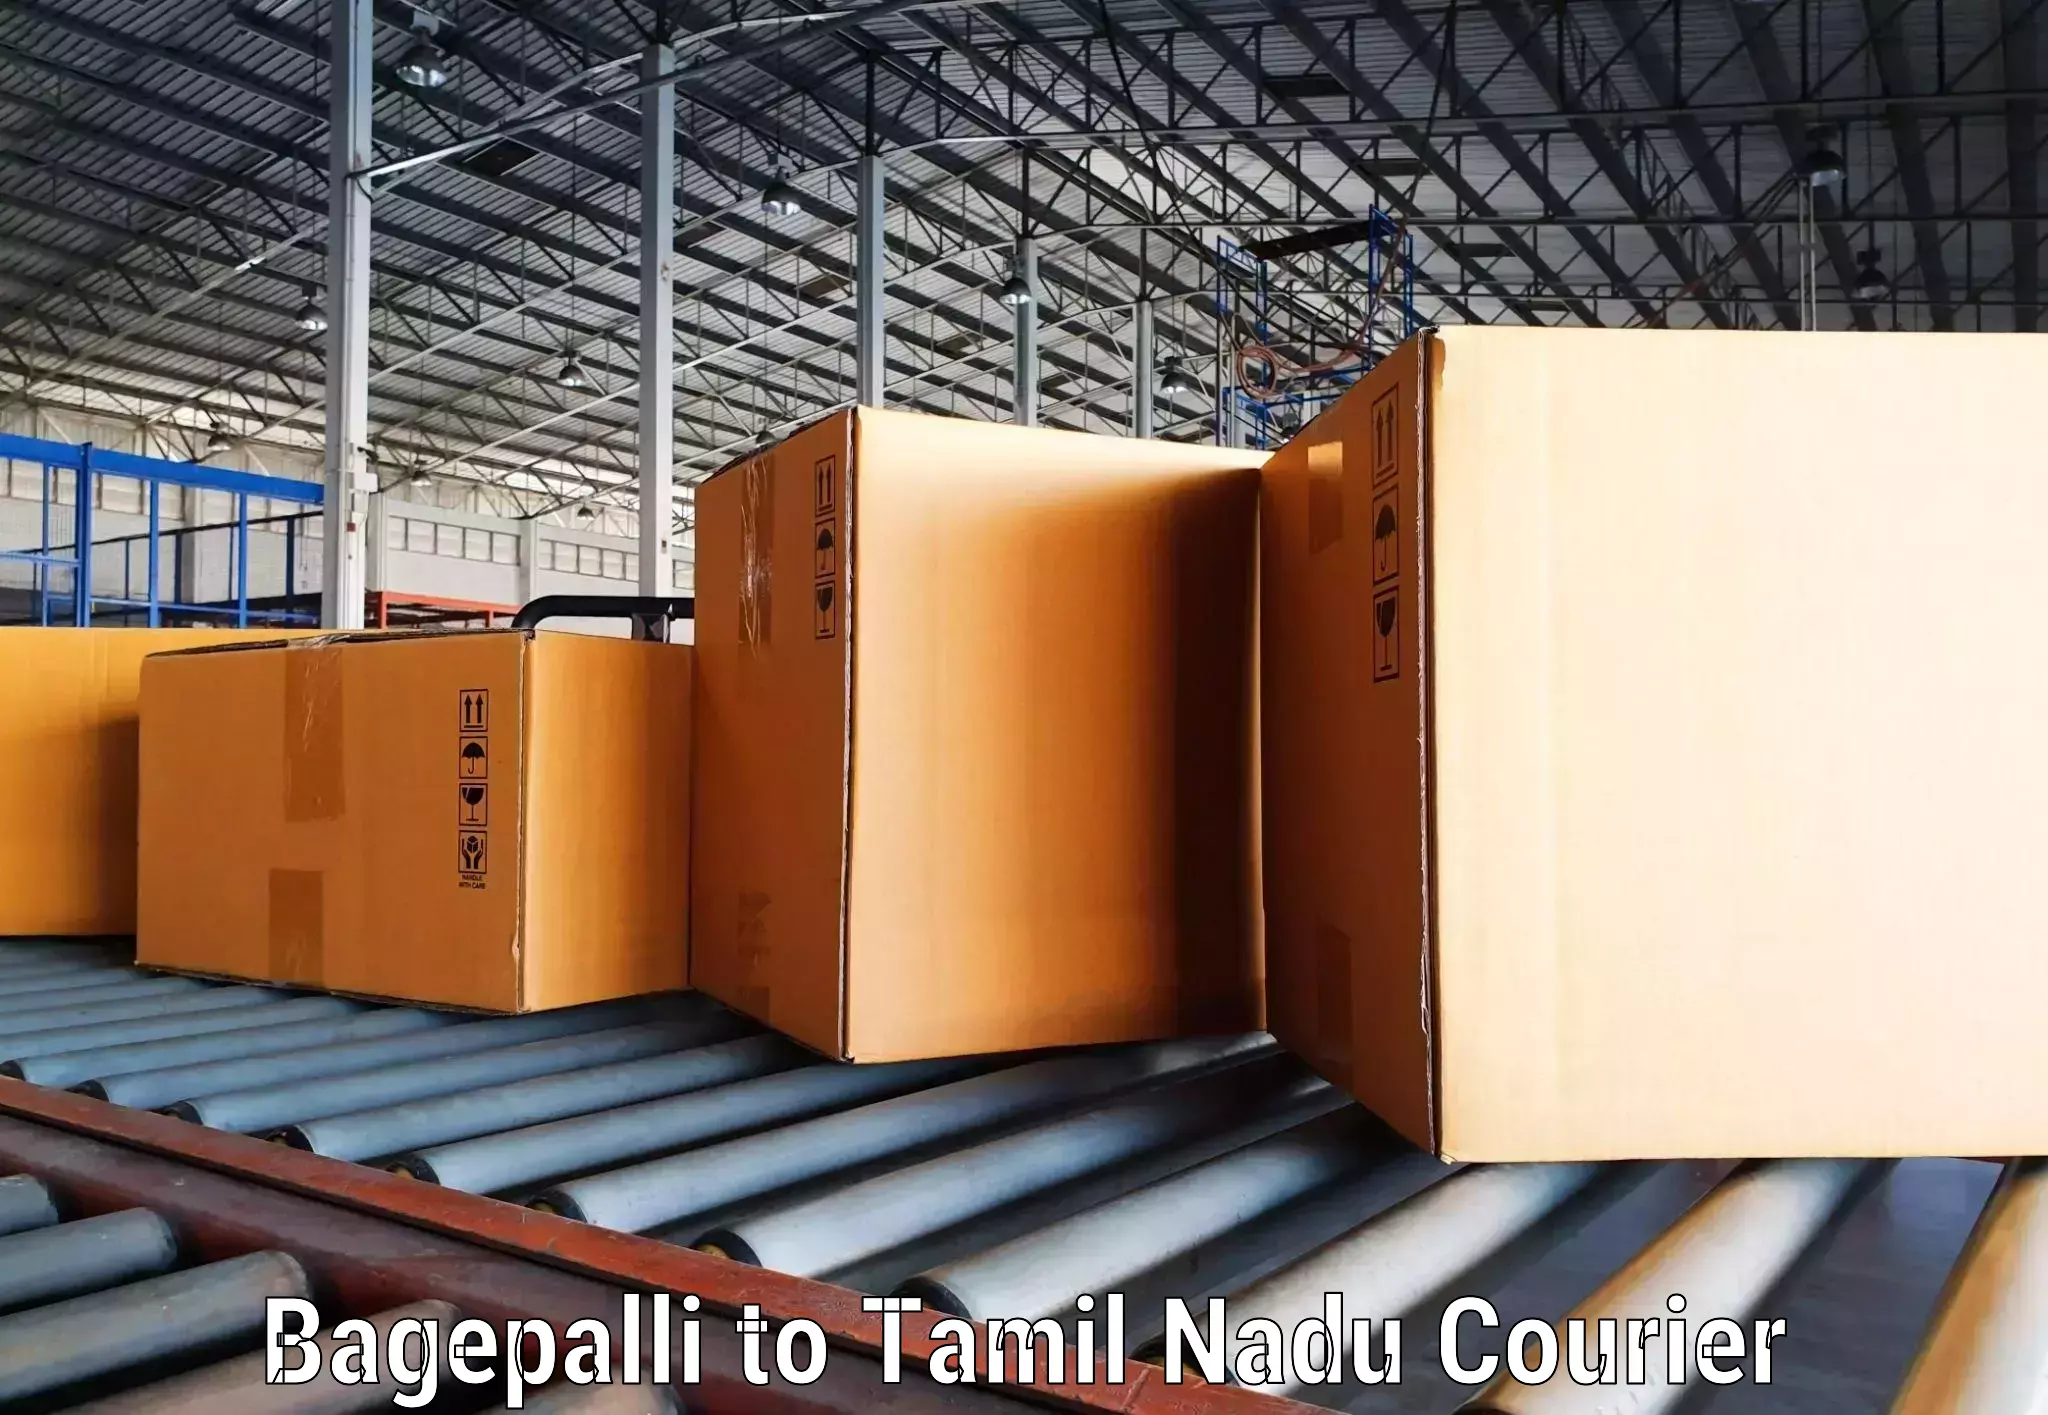 Courier service innovation Bagepalli to Thanjavur